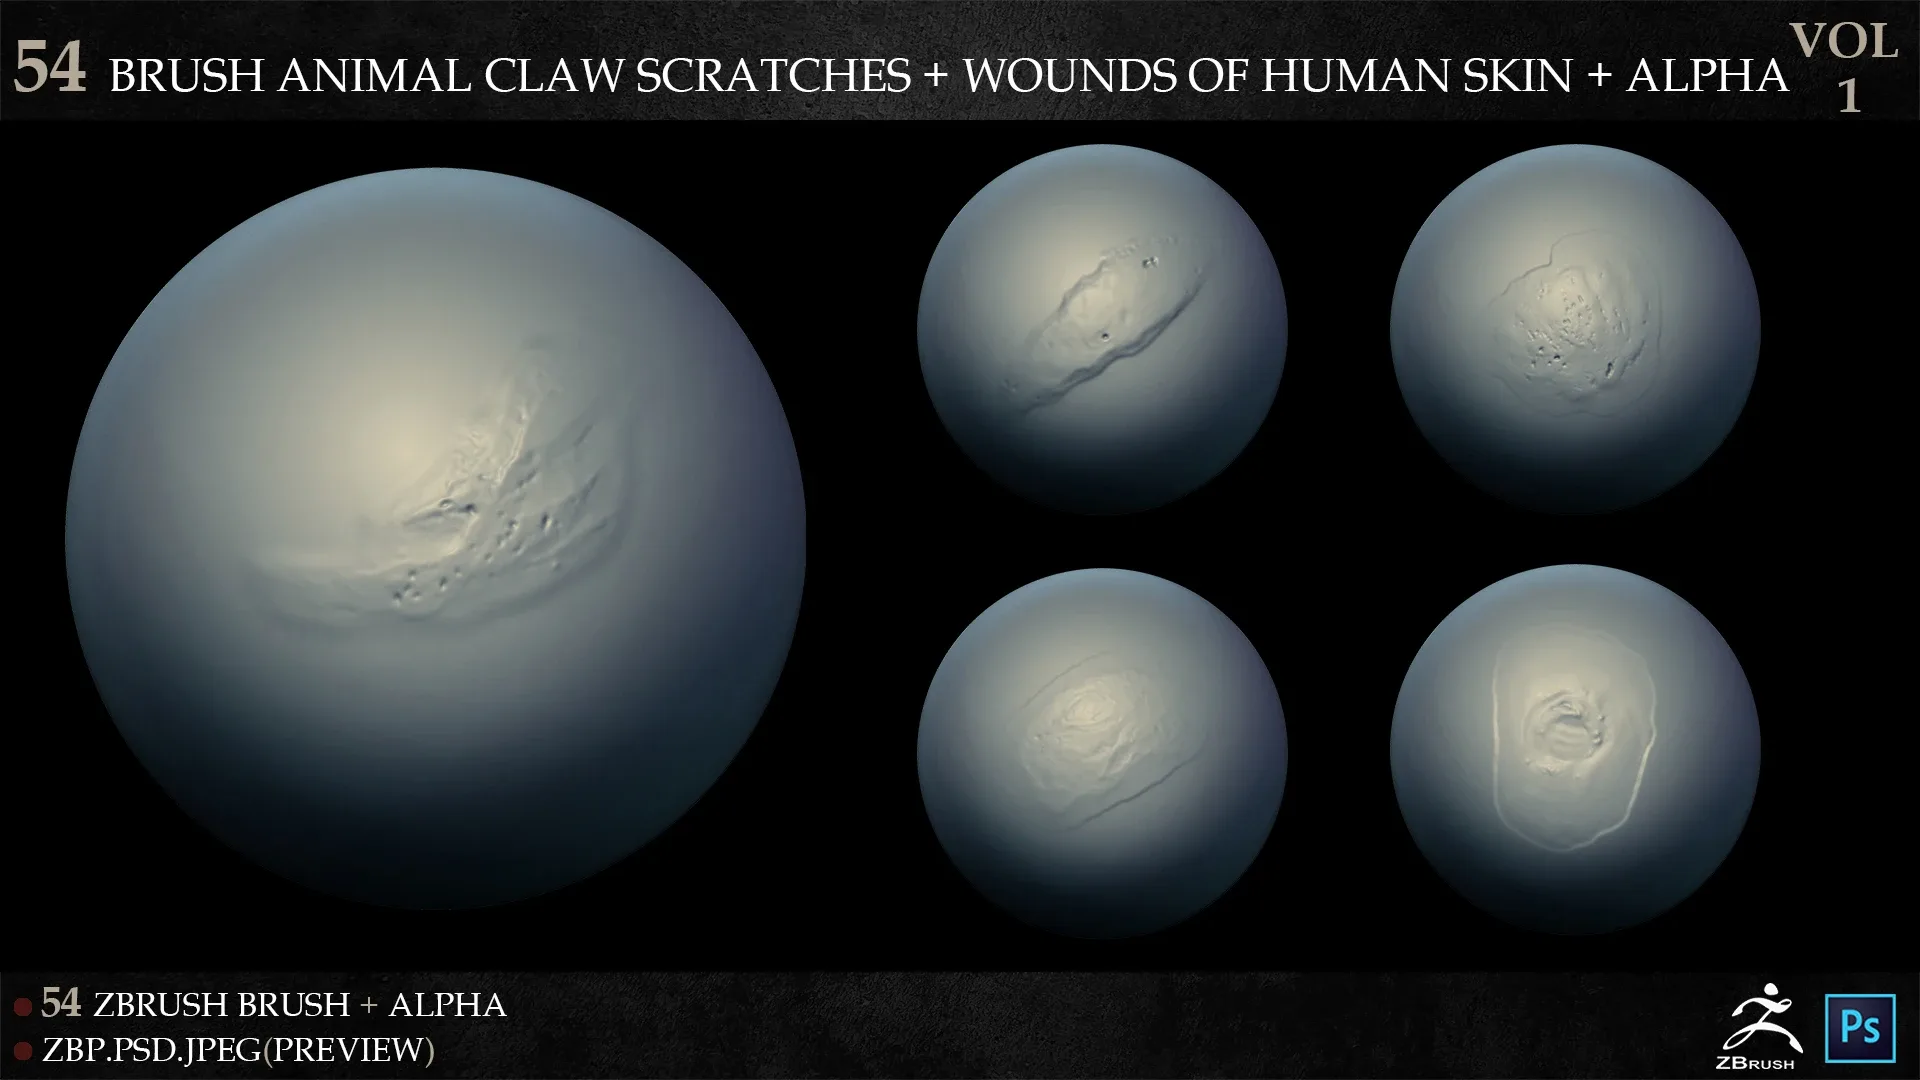 54 ZBRUSH ANIMAL CLAW SCRATCHES + WOUNDS OF HUMAN SKIN + ALPHA